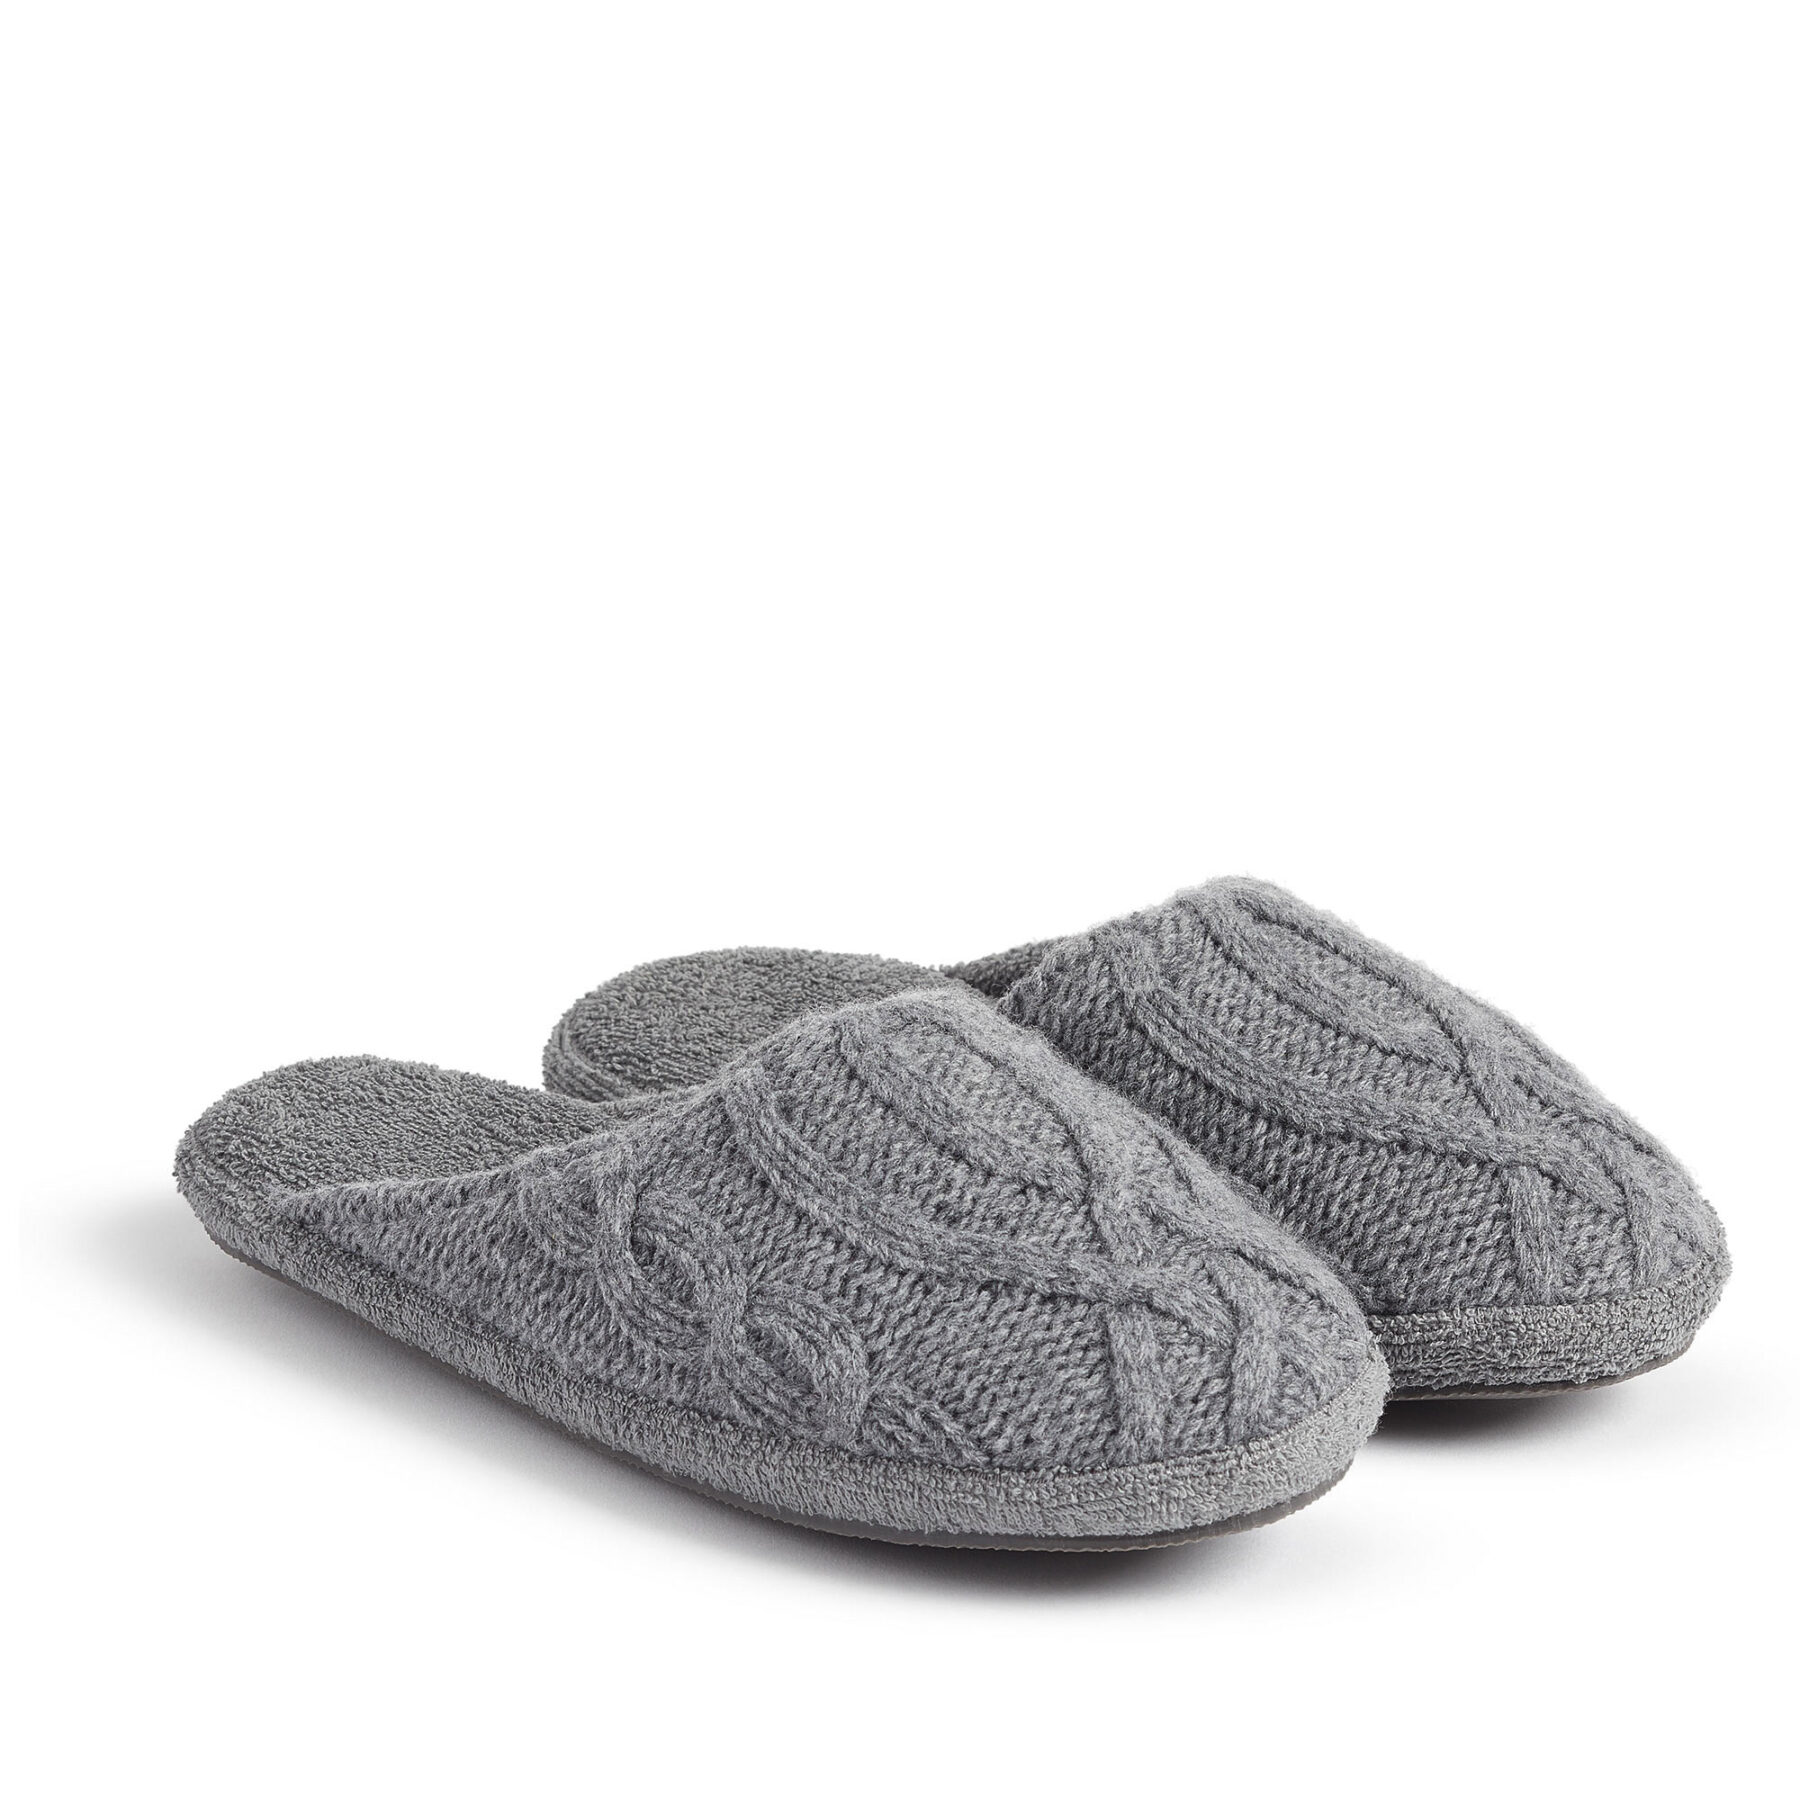 soho-house-cable-knit-slippers-dim-gray-square-0002